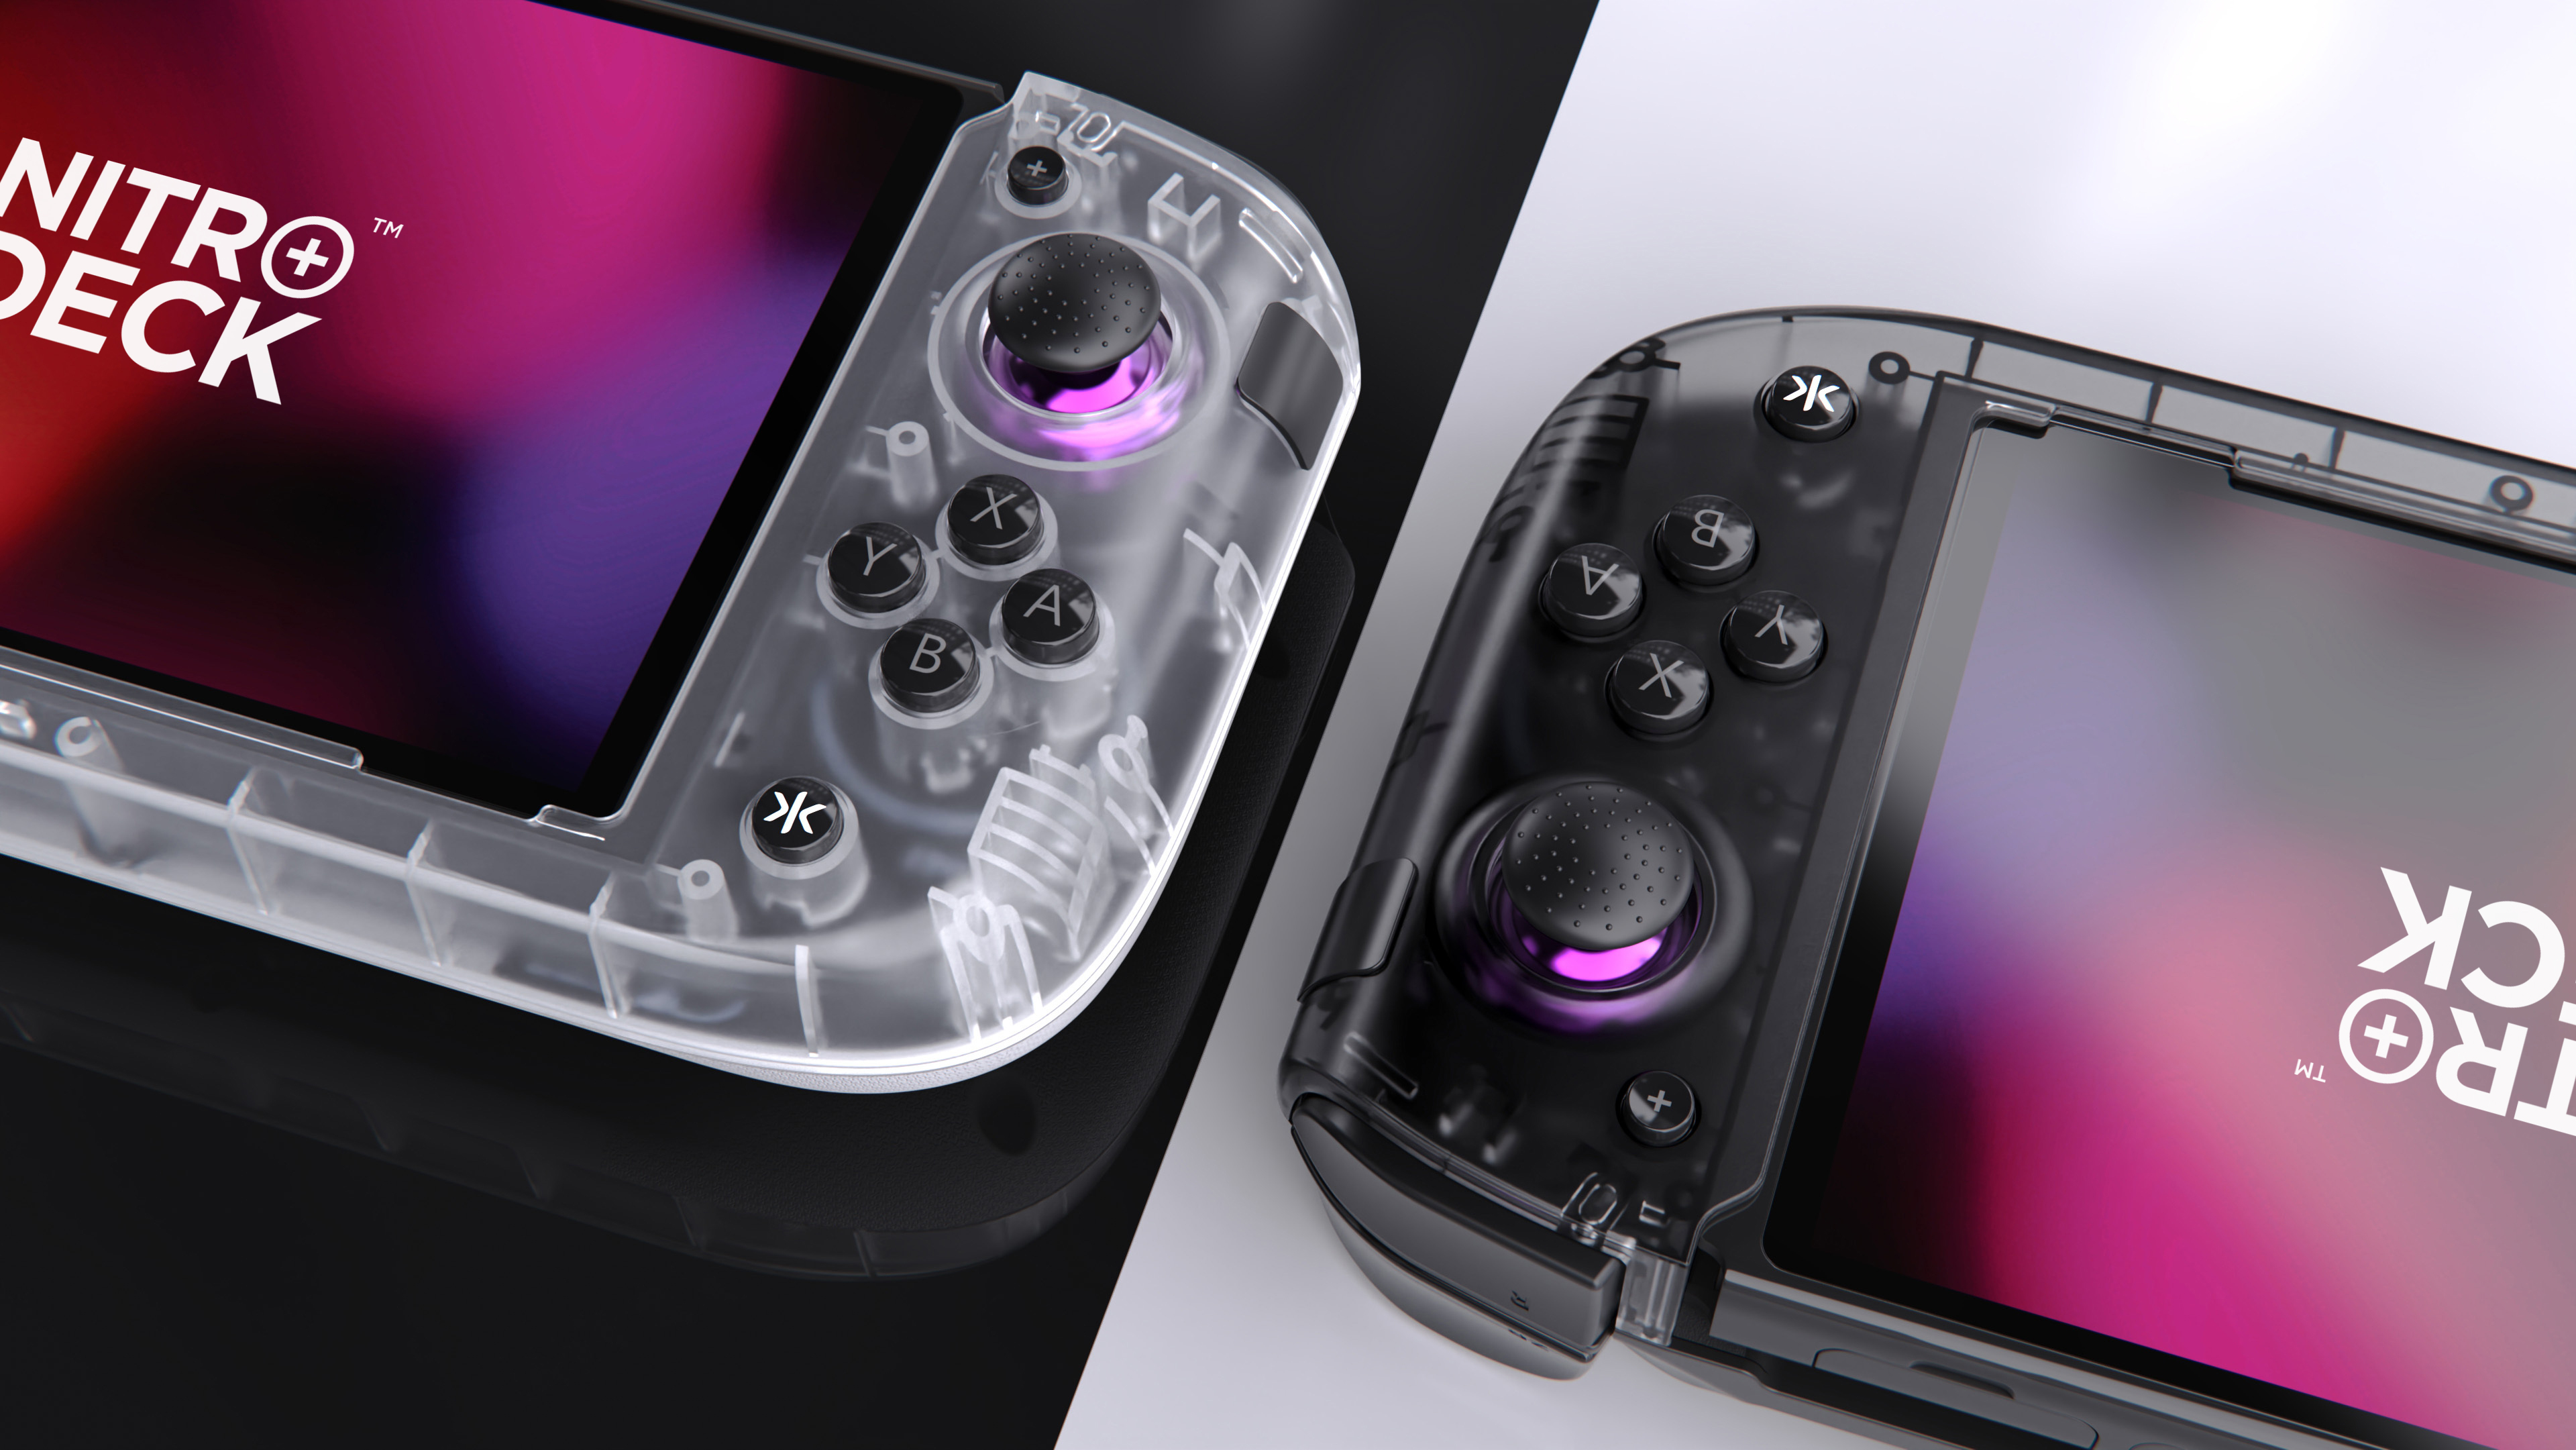 Crkd Reveals The Nitro Deck An Enhanced Version Of Its Superb Nintendo Switch Accessory